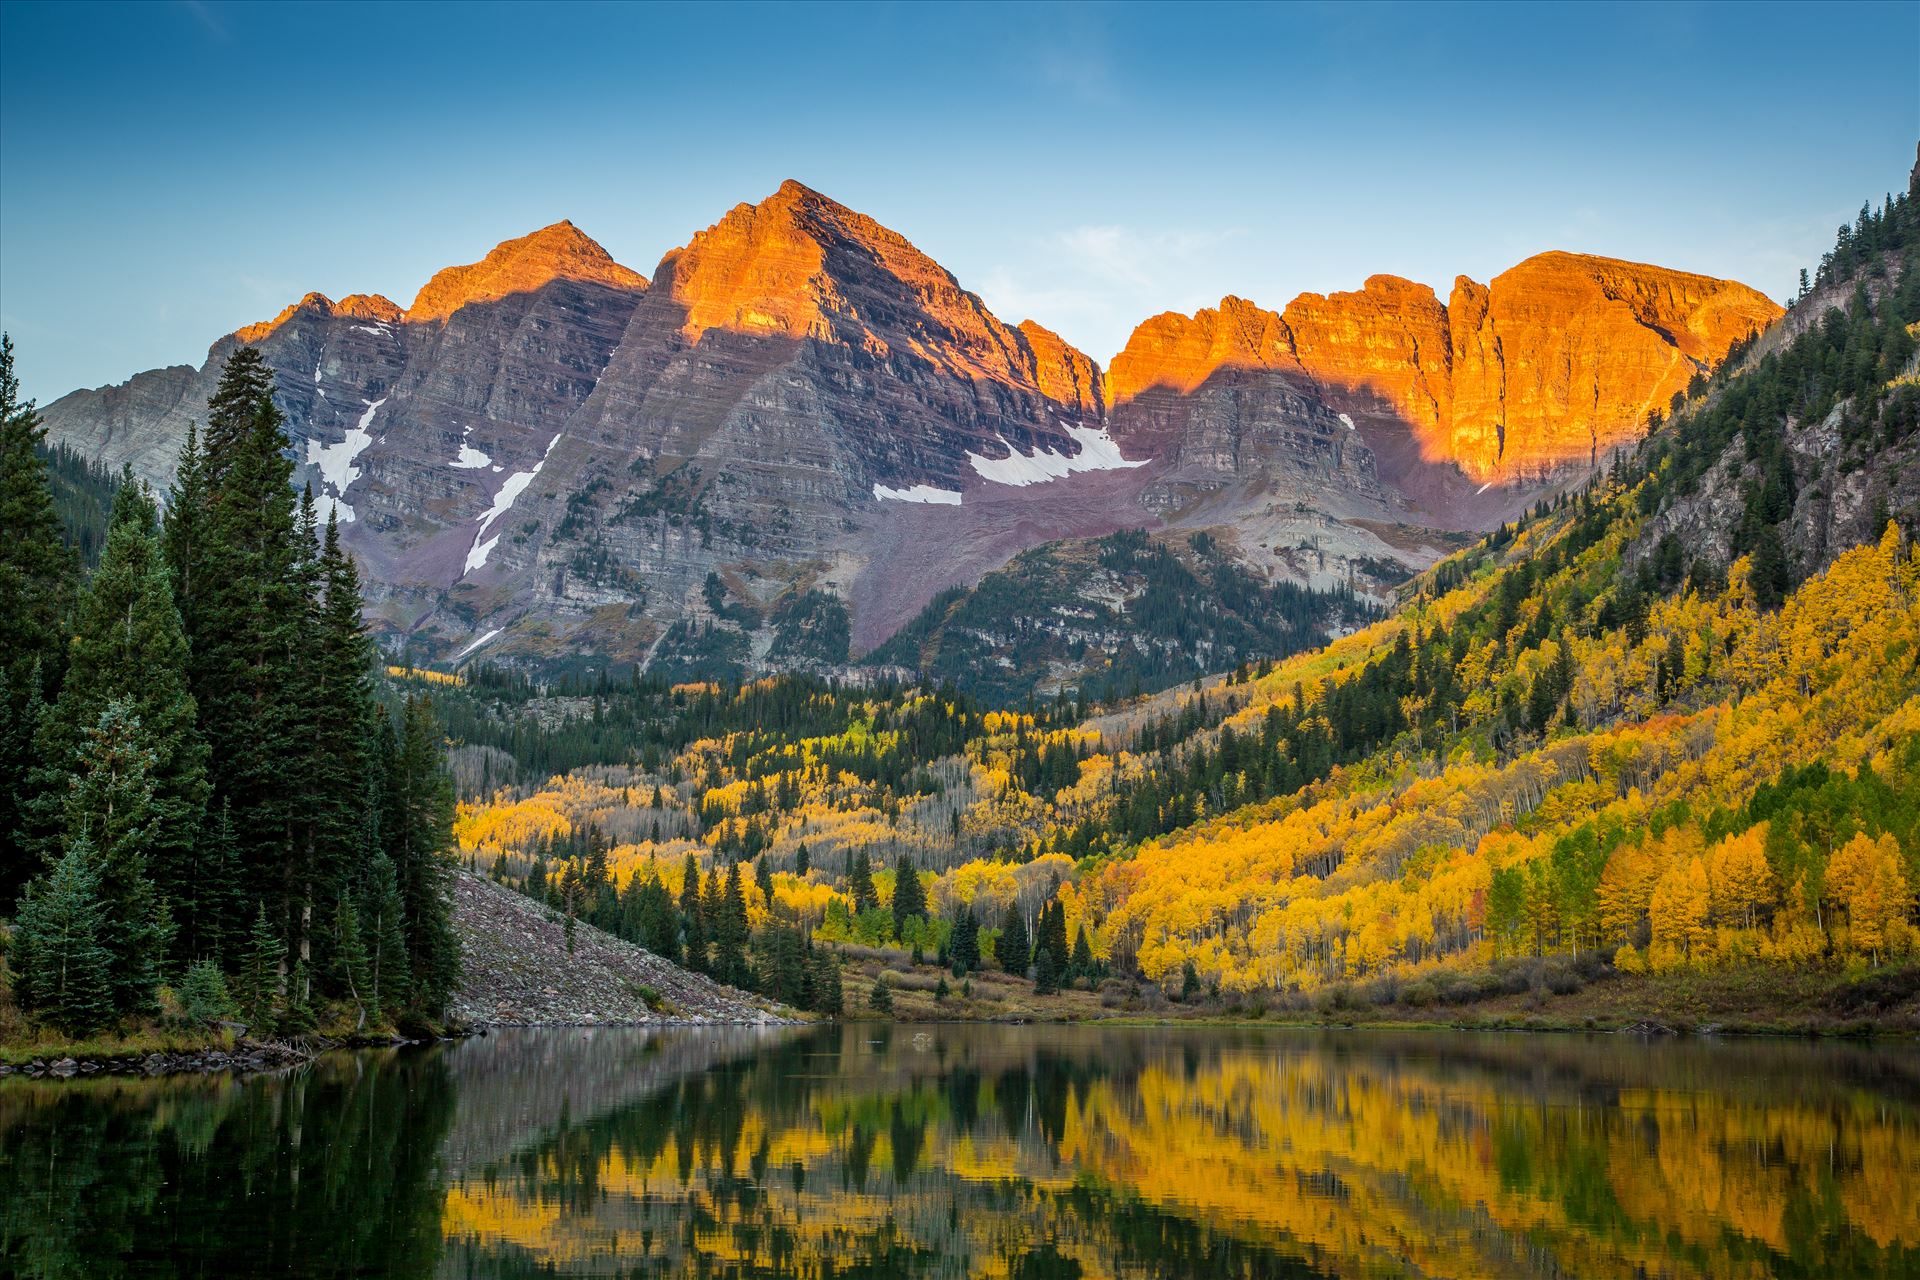 Maroon Bells Fall Sunrise - The rising sun lights the peaks of the Maroon Bells. by Scott Smith Photos